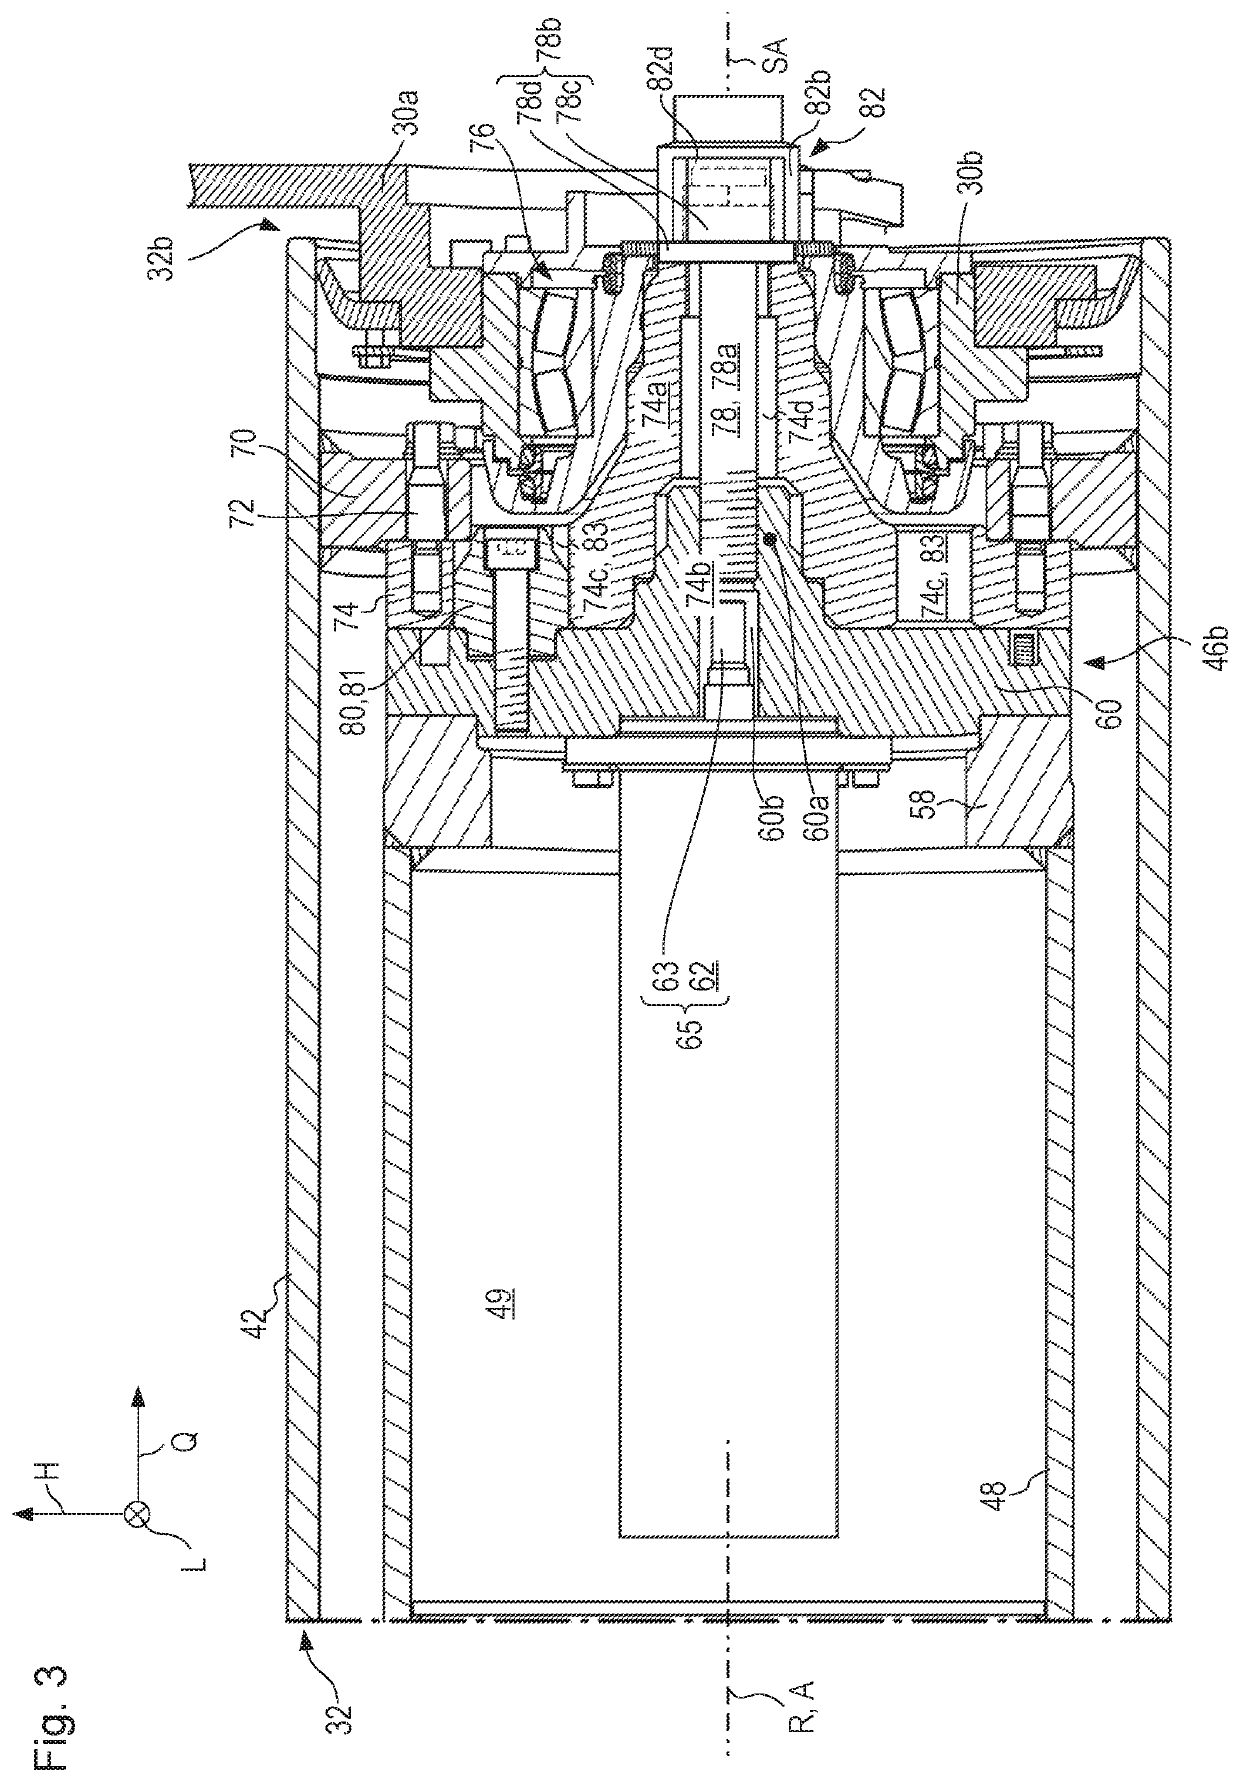 Earth working machine whose rotatable working apparatus, for installation on the machine, is conveyable into its operating position using an onboard actuator